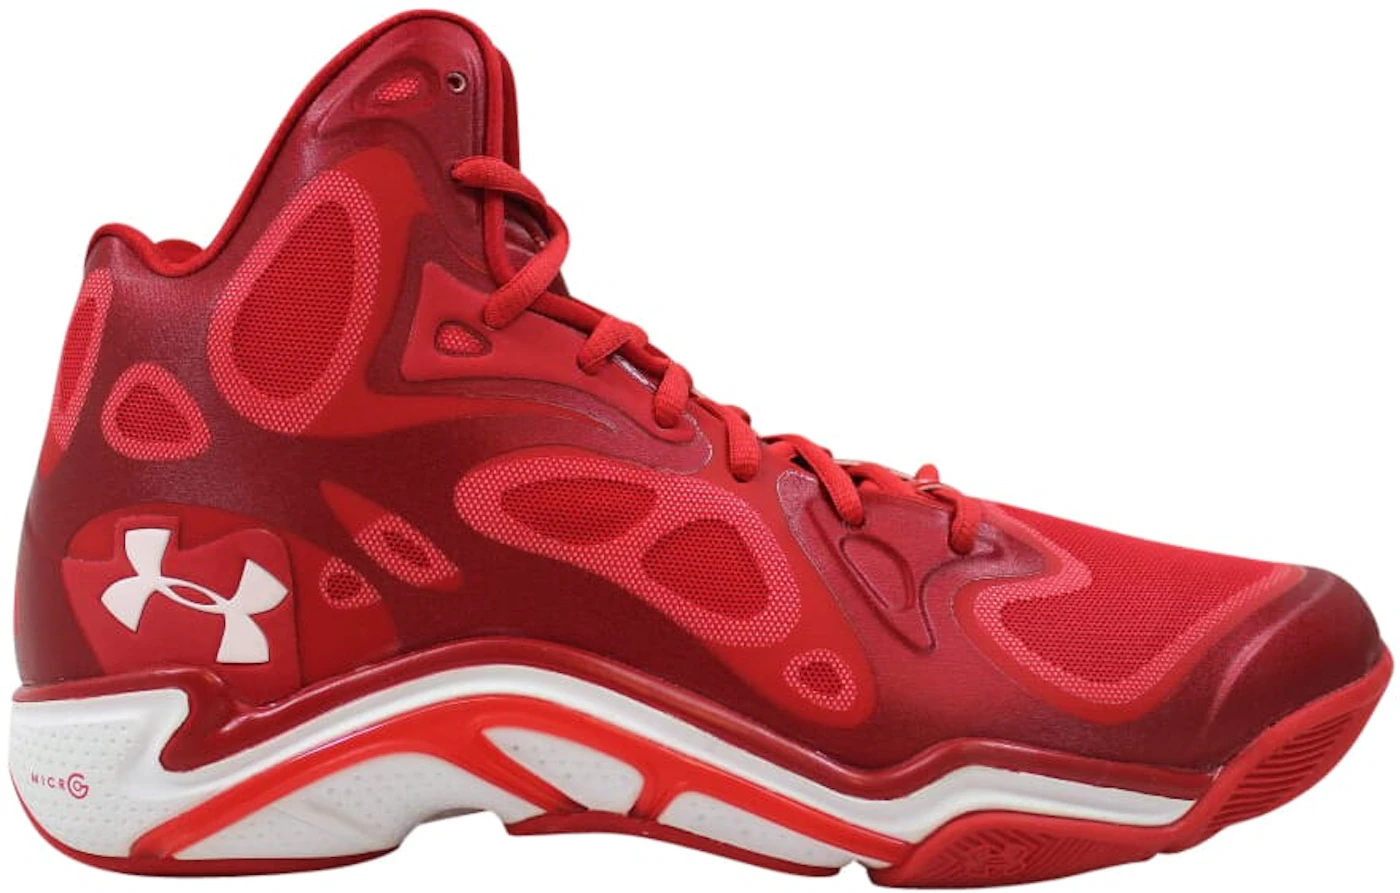 Under Armour Micro G Anatomix Spawn Red Men's - 1238925-601 - US